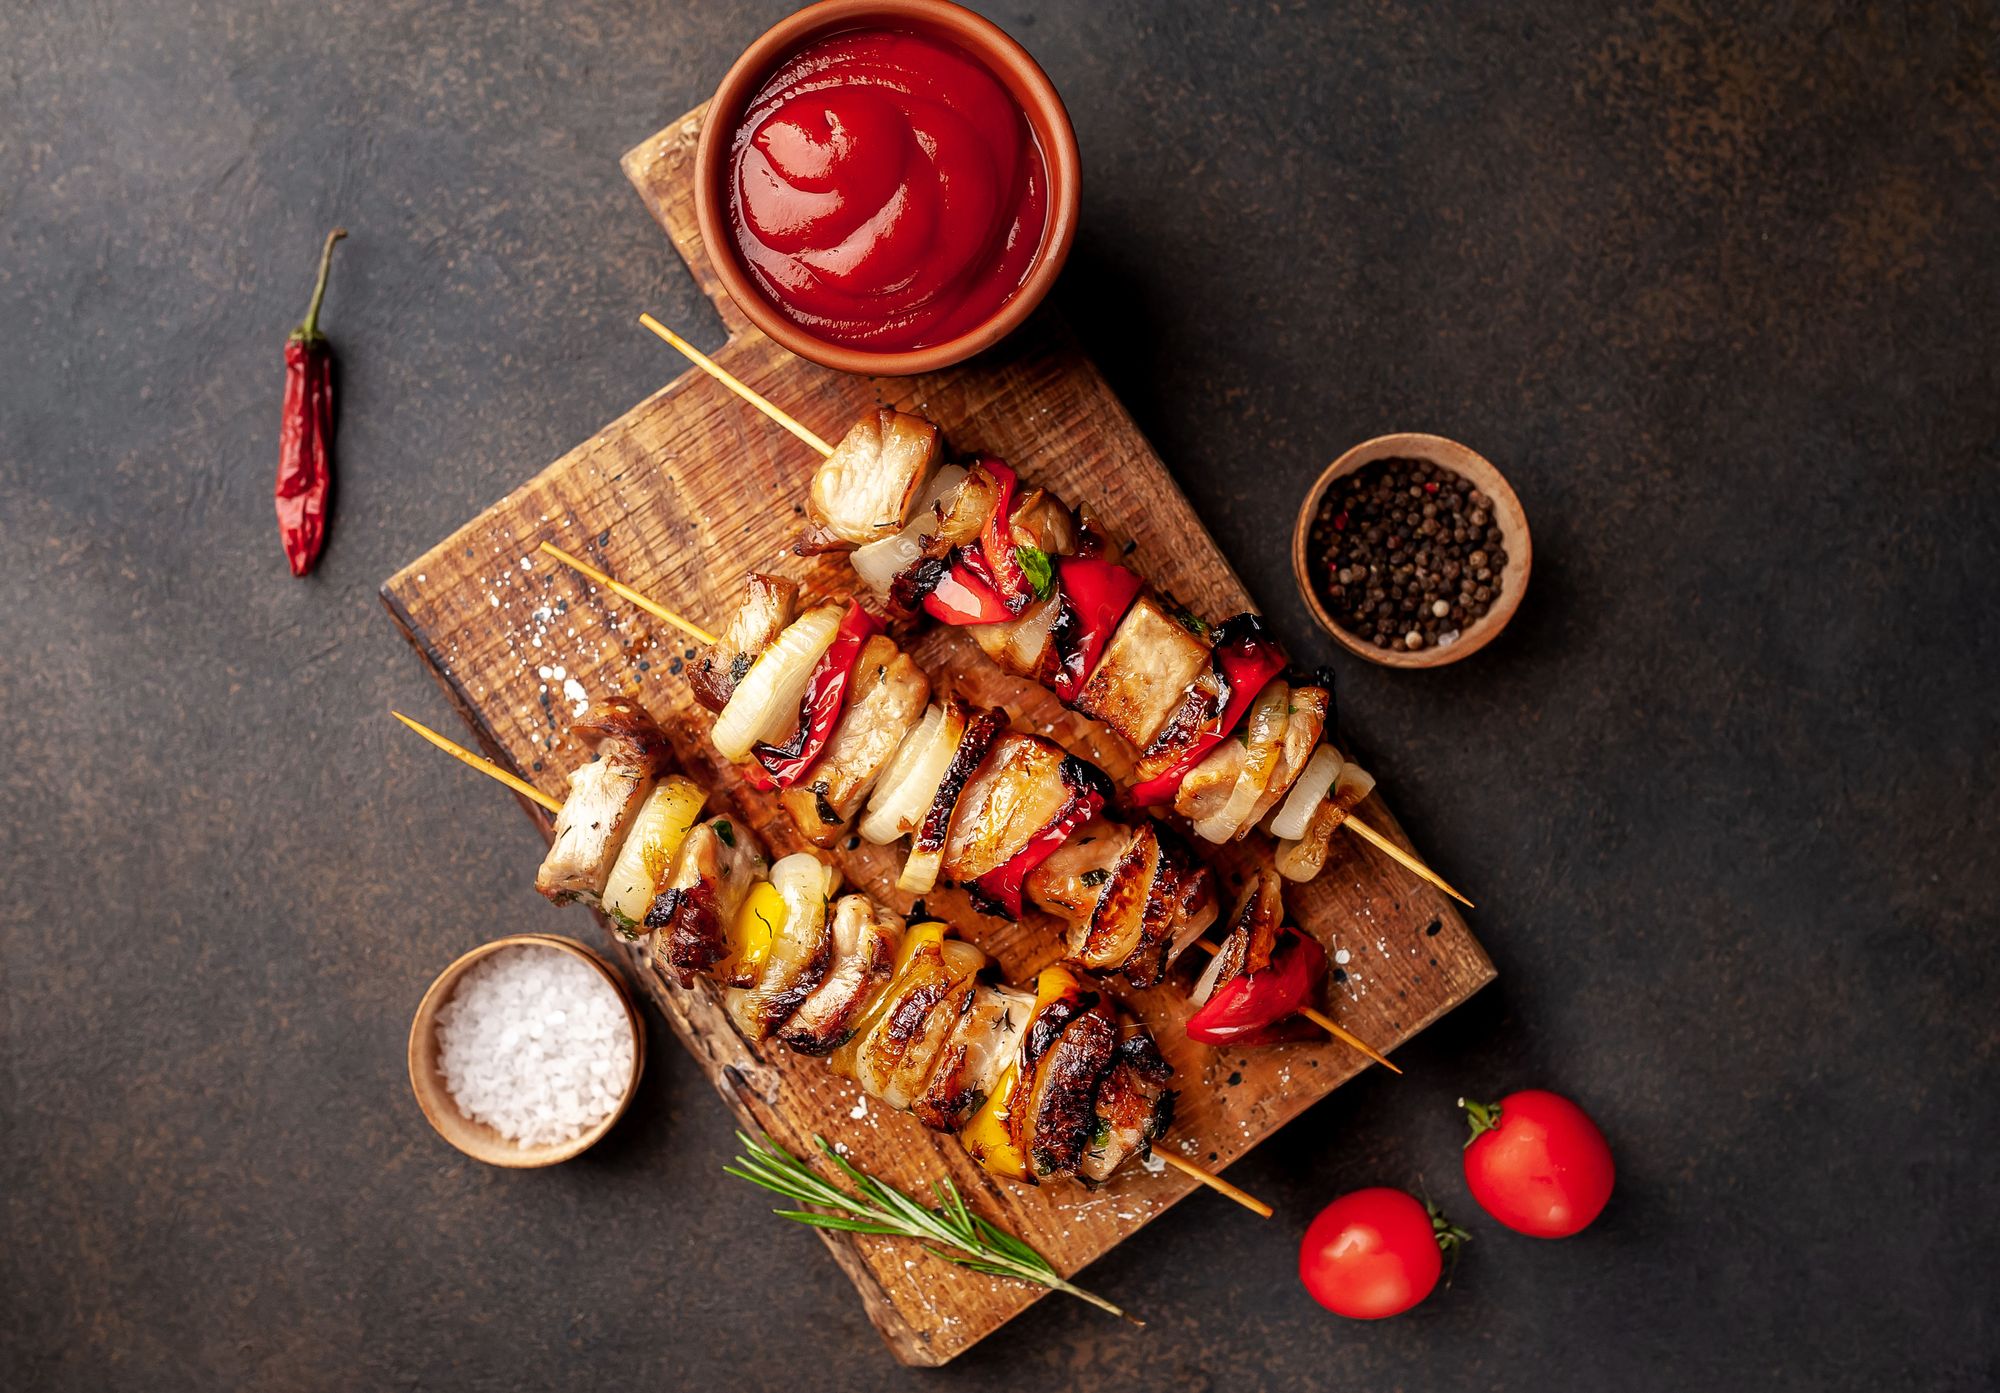 Portuguese Pork Skewers with Charred Tomatoes